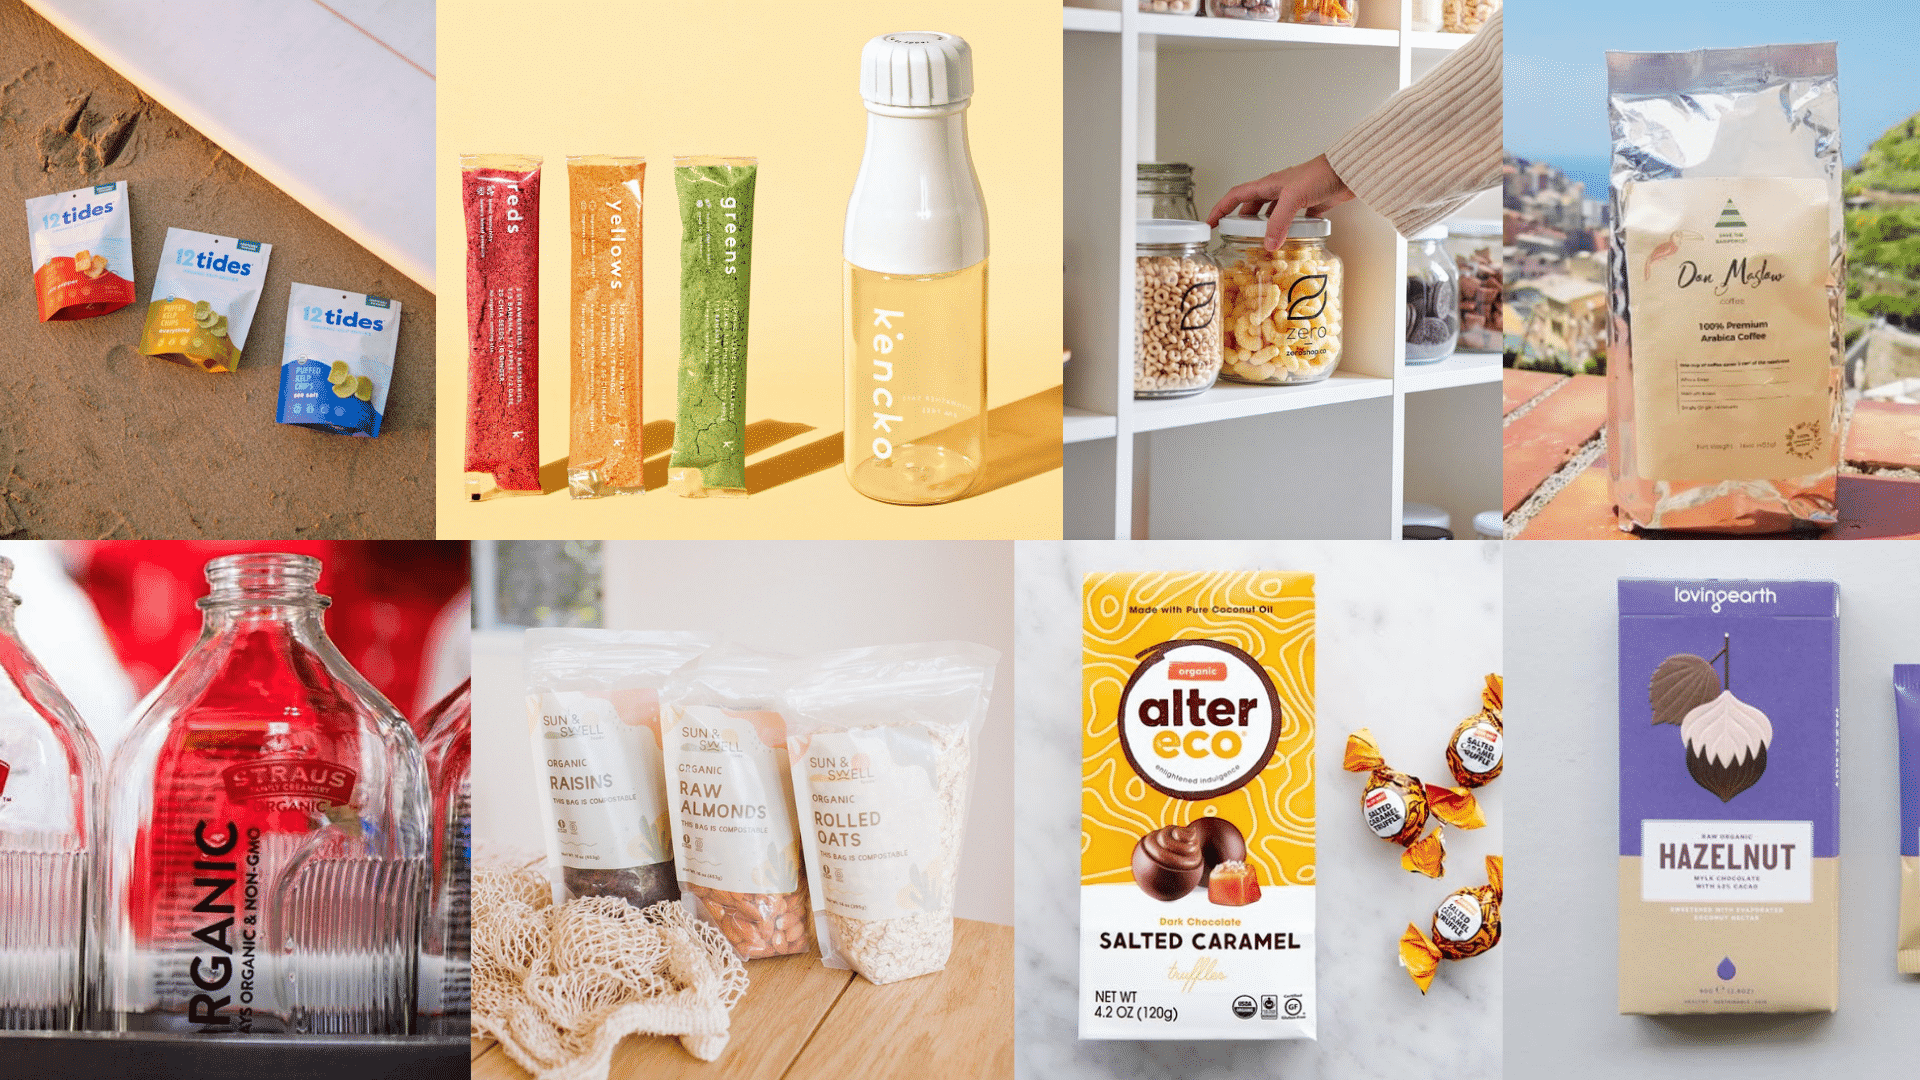 Innovations in Sustainable Packaging: Case Study of Eco-Friendly Initiatives by Leading Brands